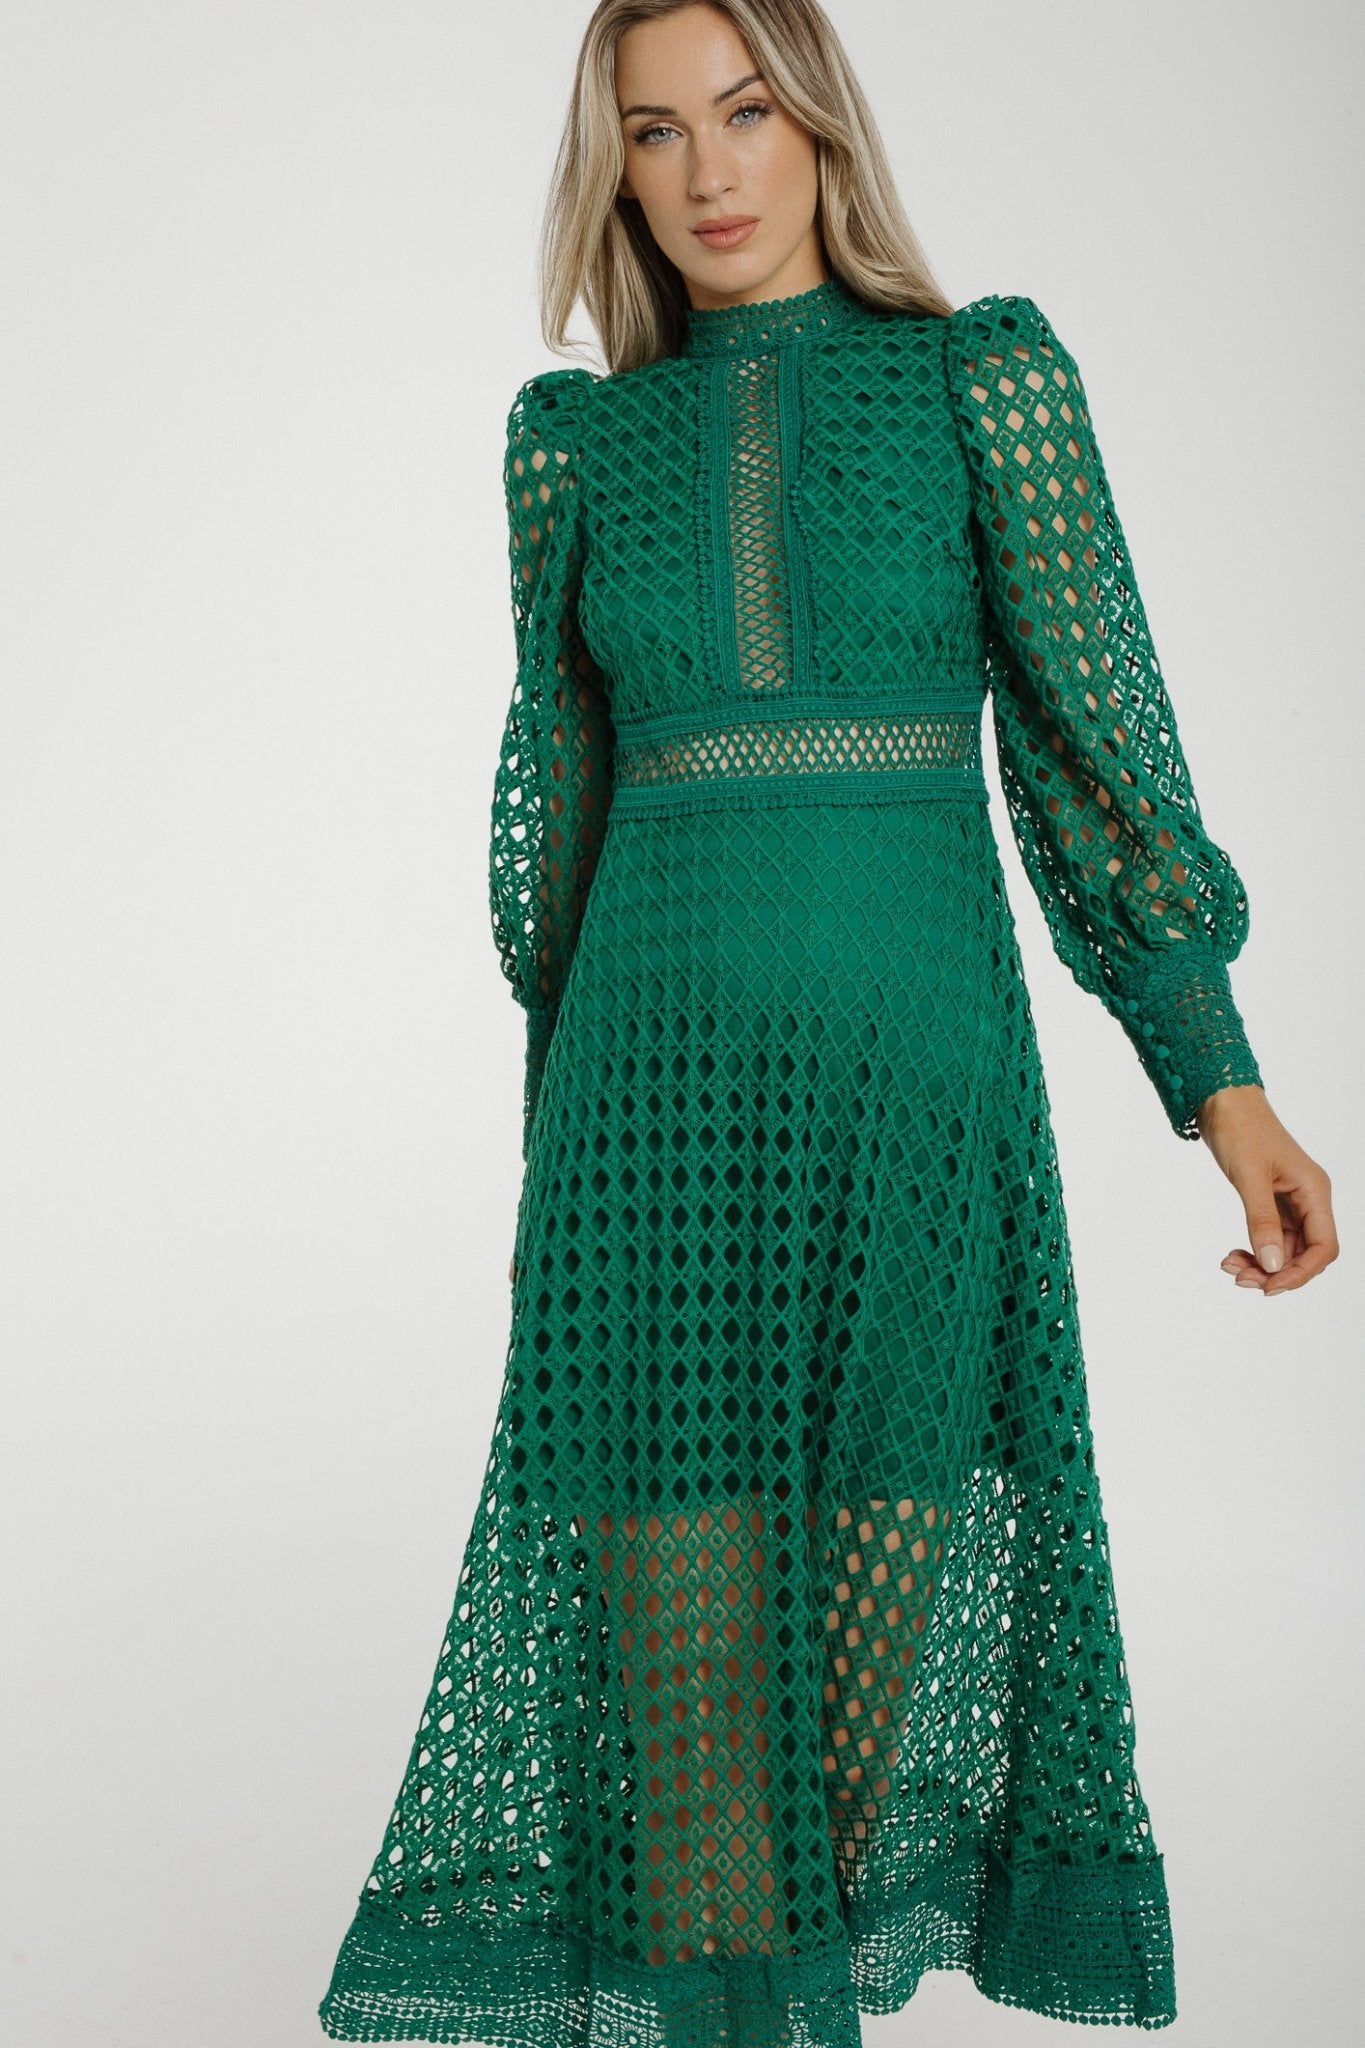 Holly High Neck Embroidered Dress In Green - The Walk in Wardrobe